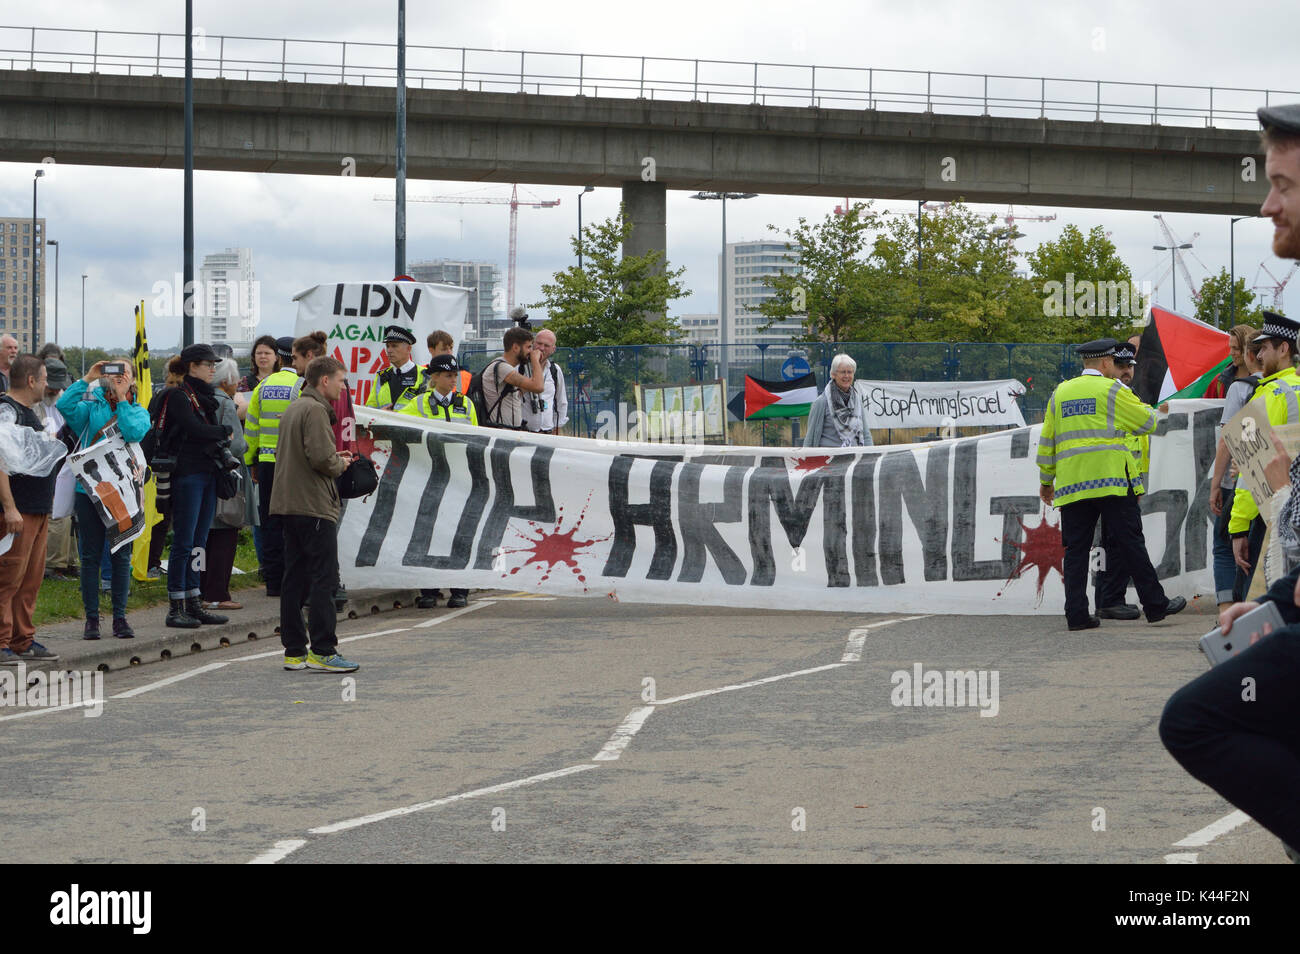 London, UK, 4th September 2017 Protestors outside the Defence and Security Equipment International (DSEI)  2017 exhibition being held at the ExCel exhibition centre in East London. Credit: A Christy/Alamy Live News. Stock Photo